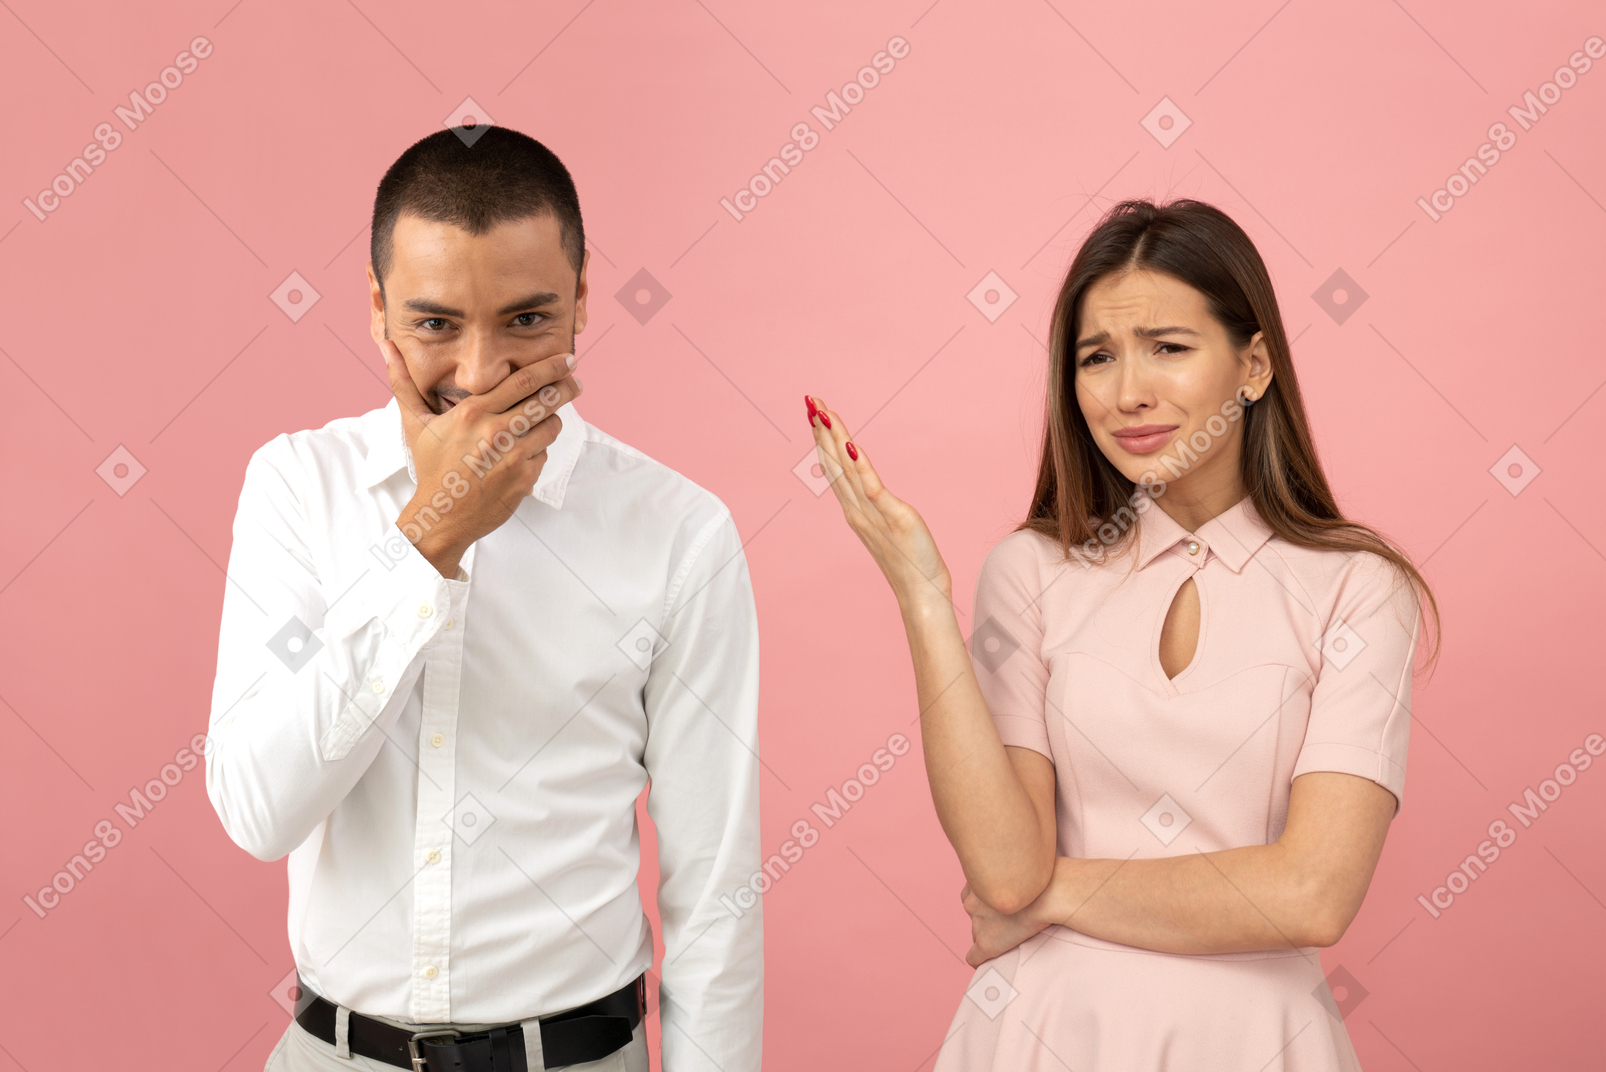 Attractive young woman disapproving of his behavior